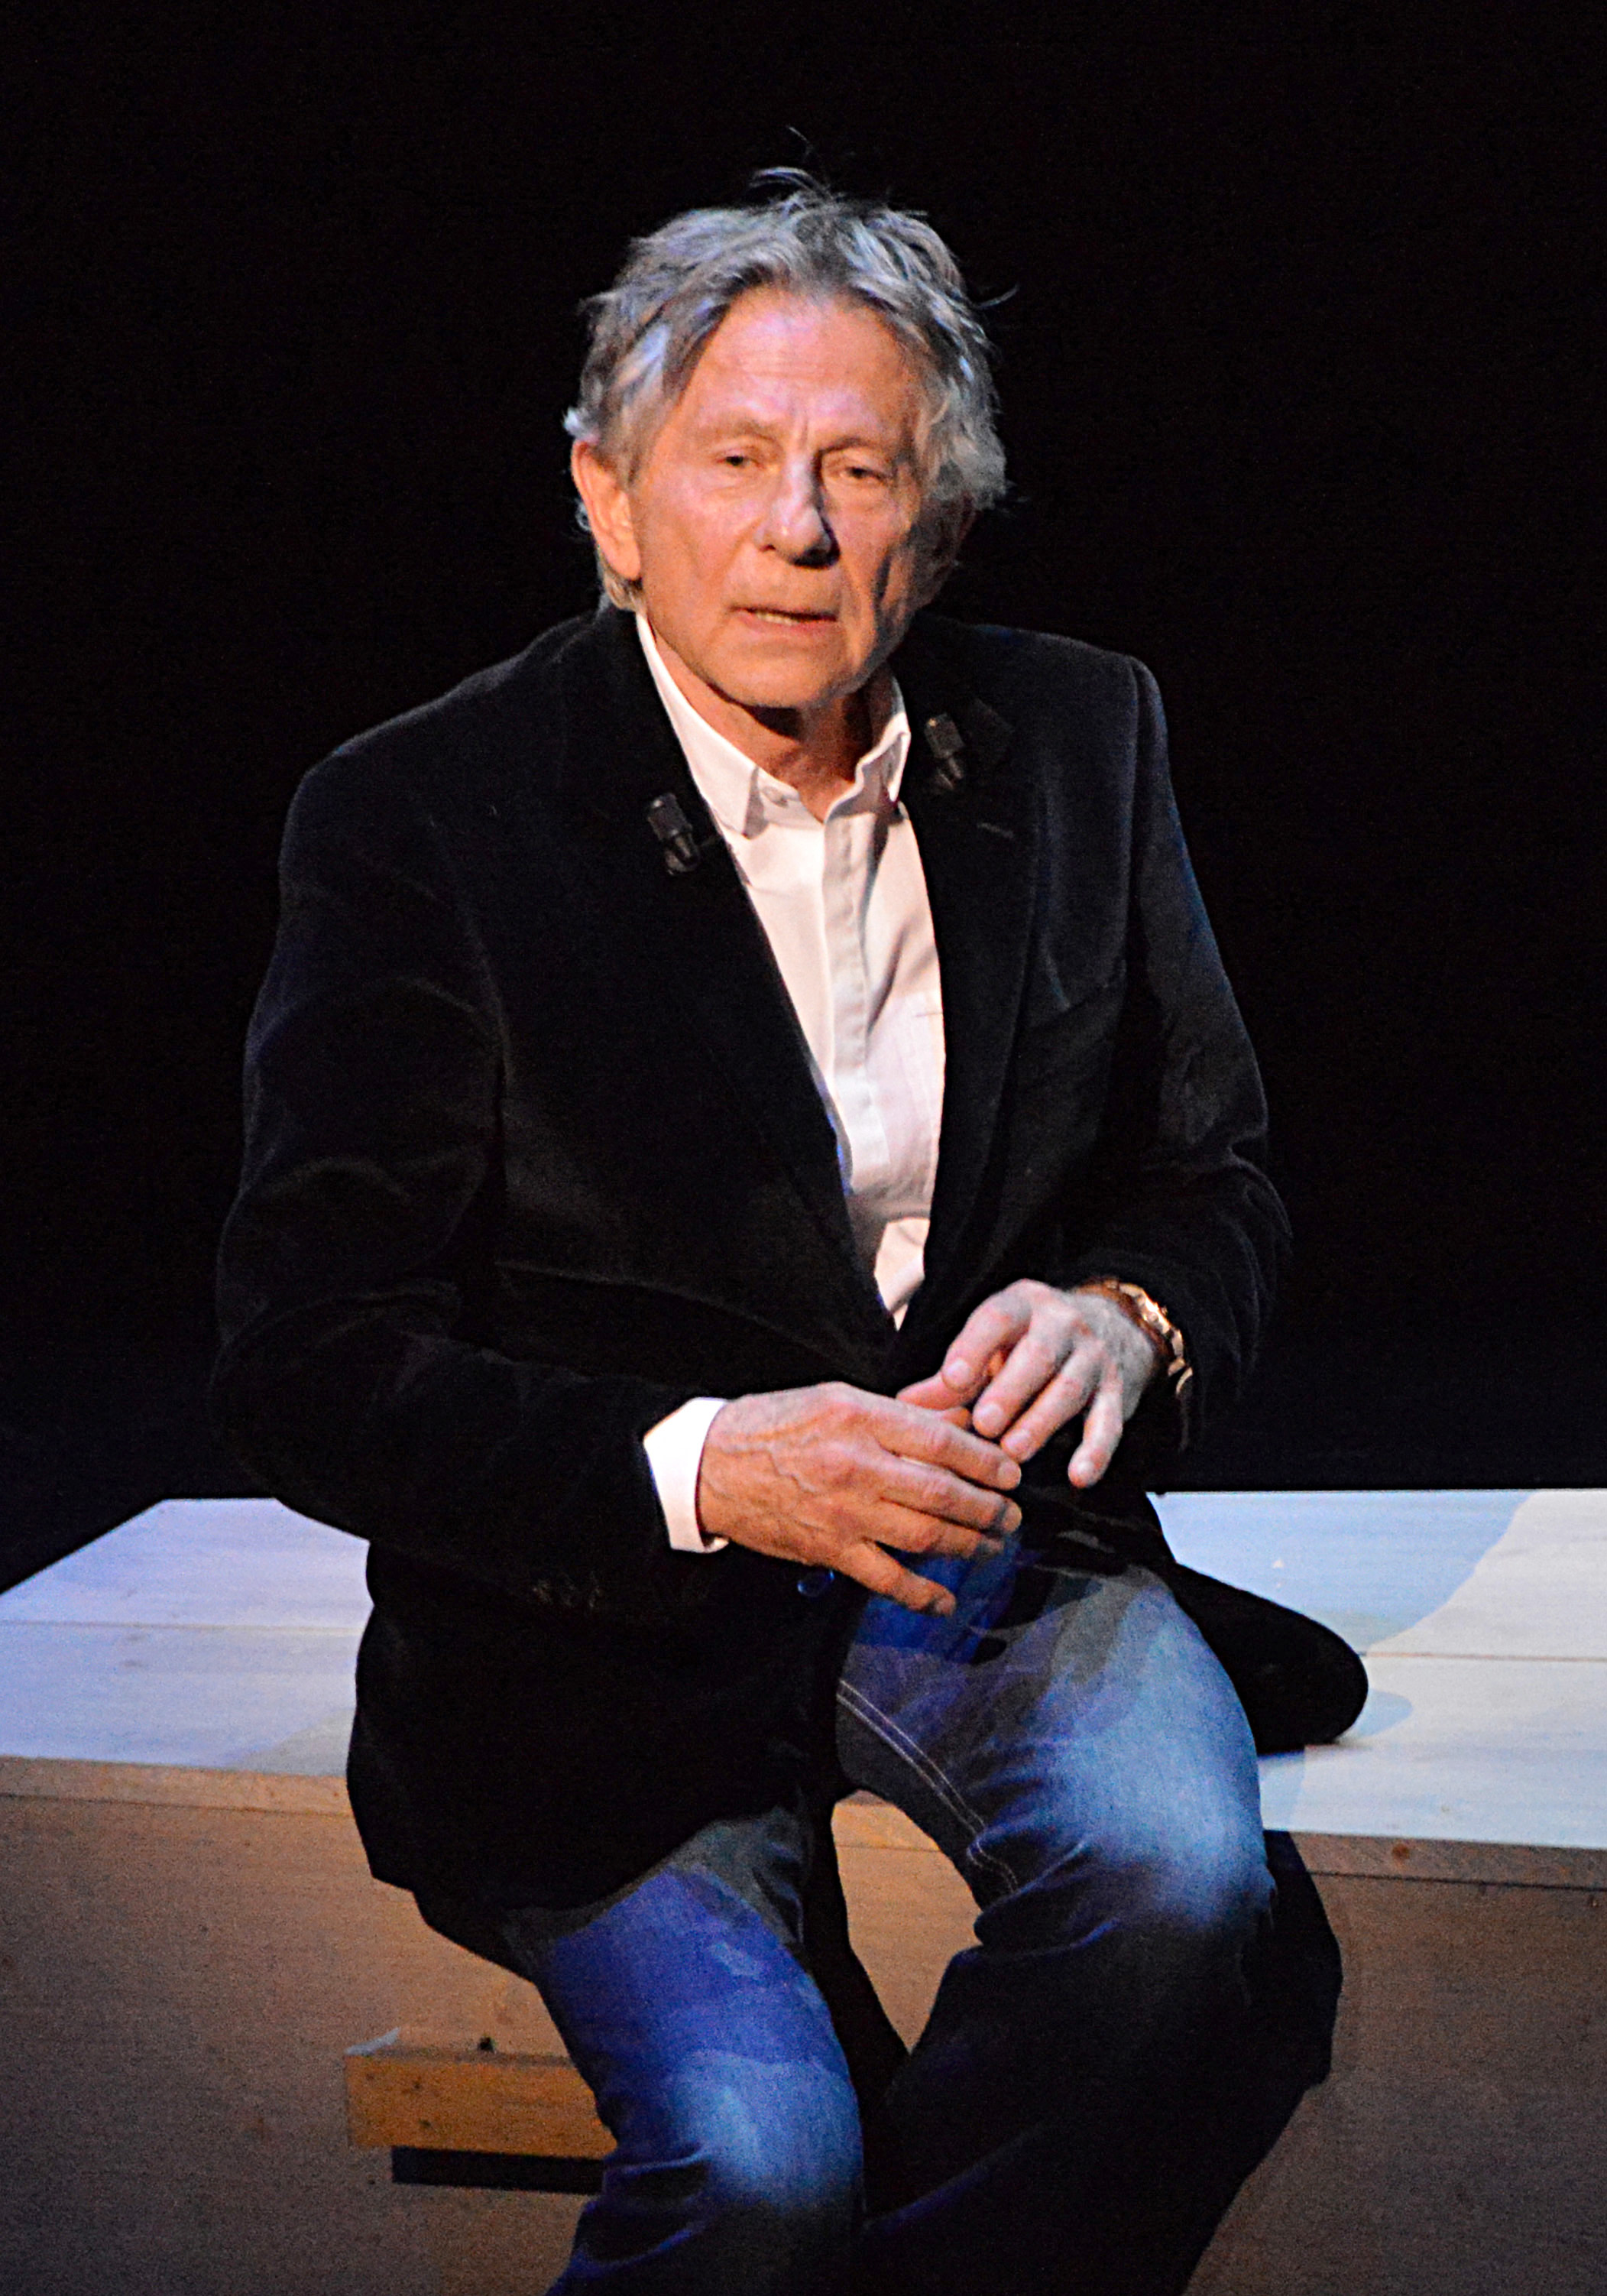 Roman Polanski at the 'Le Bal des Vampires' Press Conference on March 17, 2014 in Paris, France.